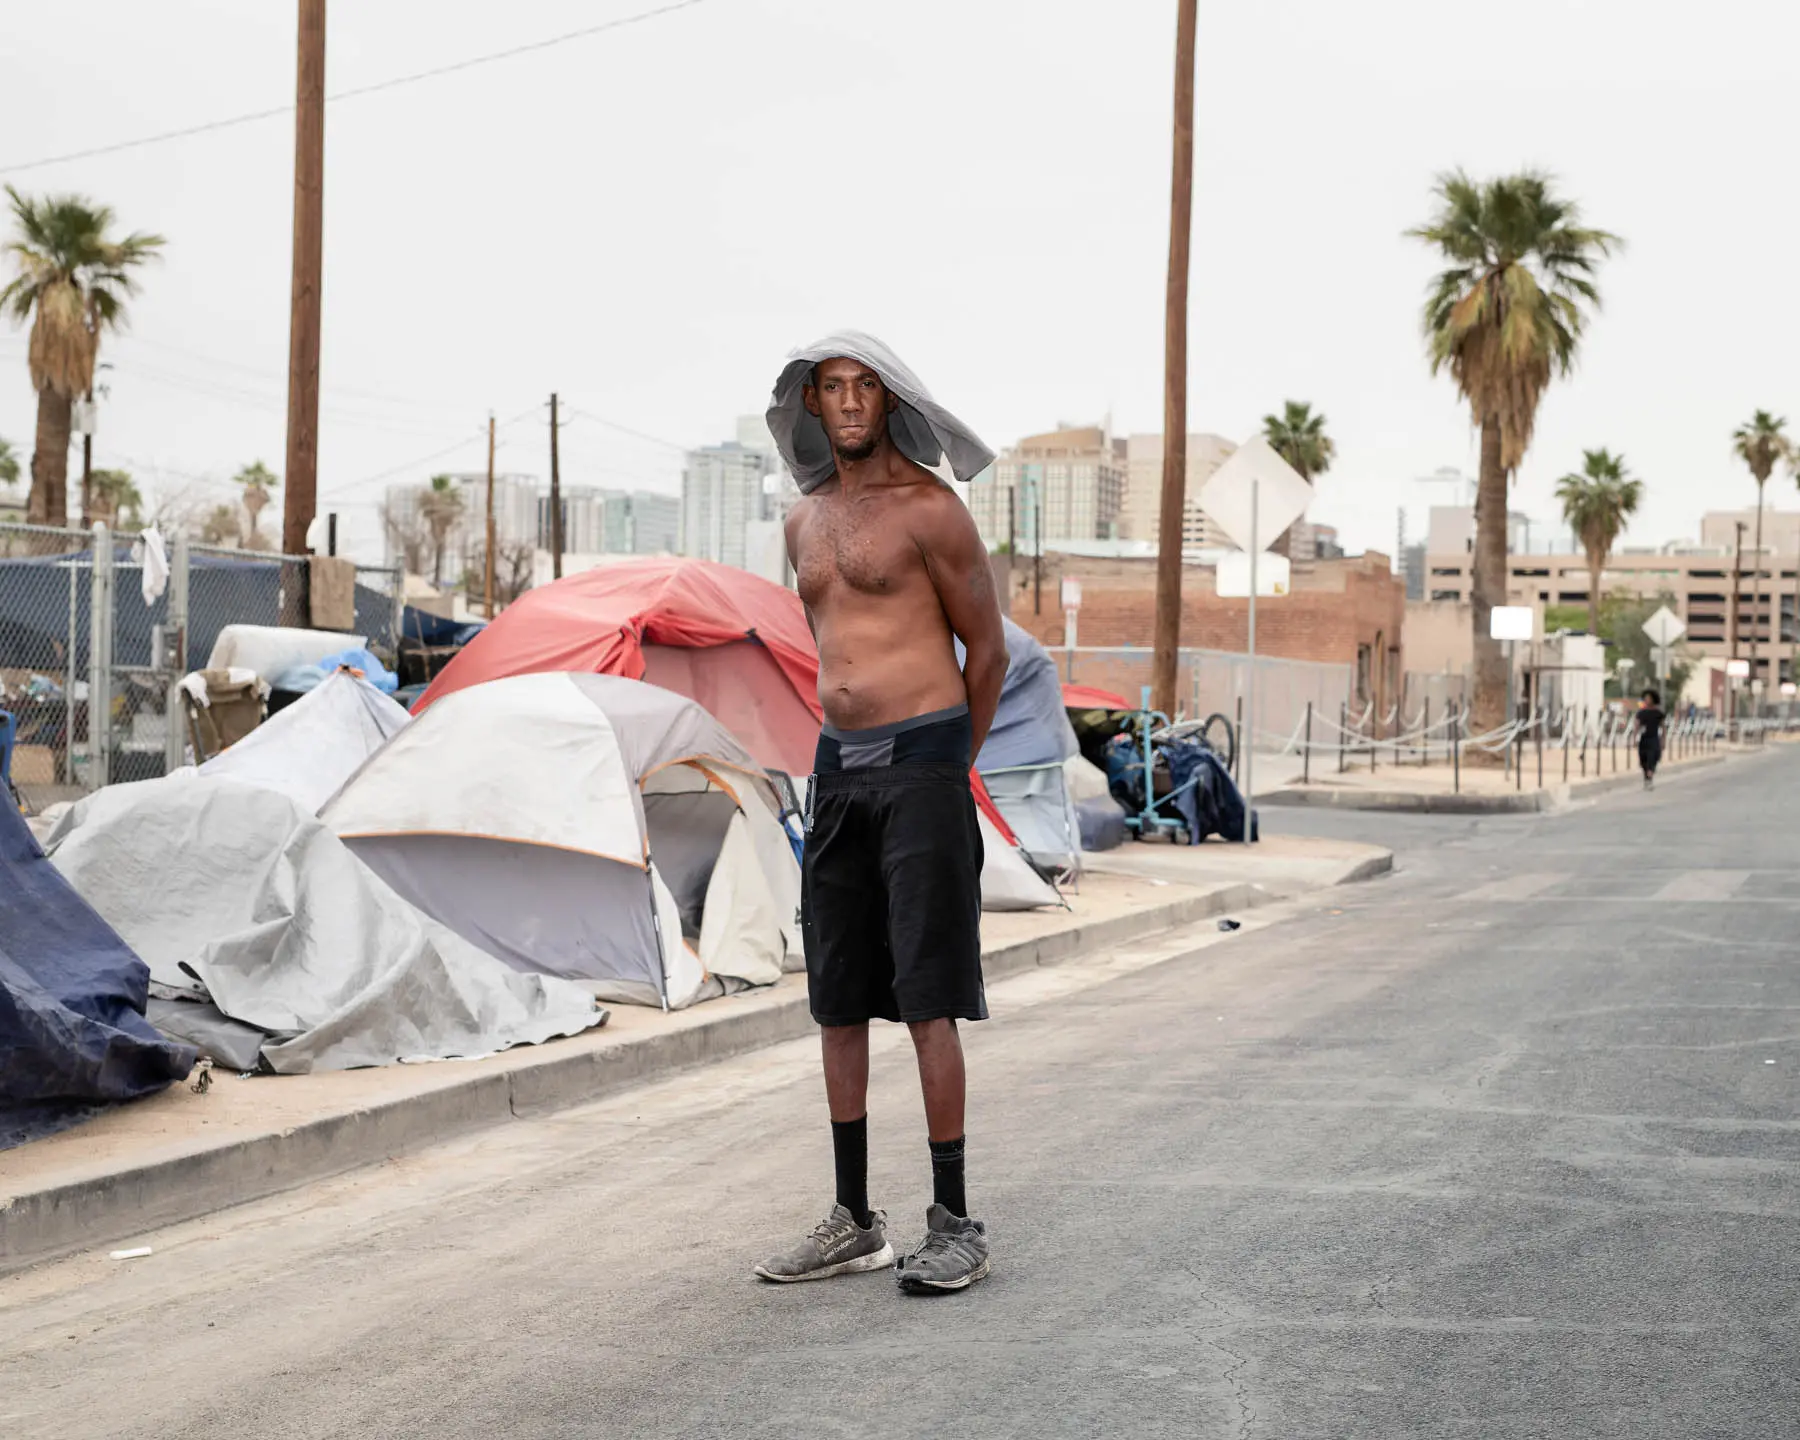 a man stands on street next tents